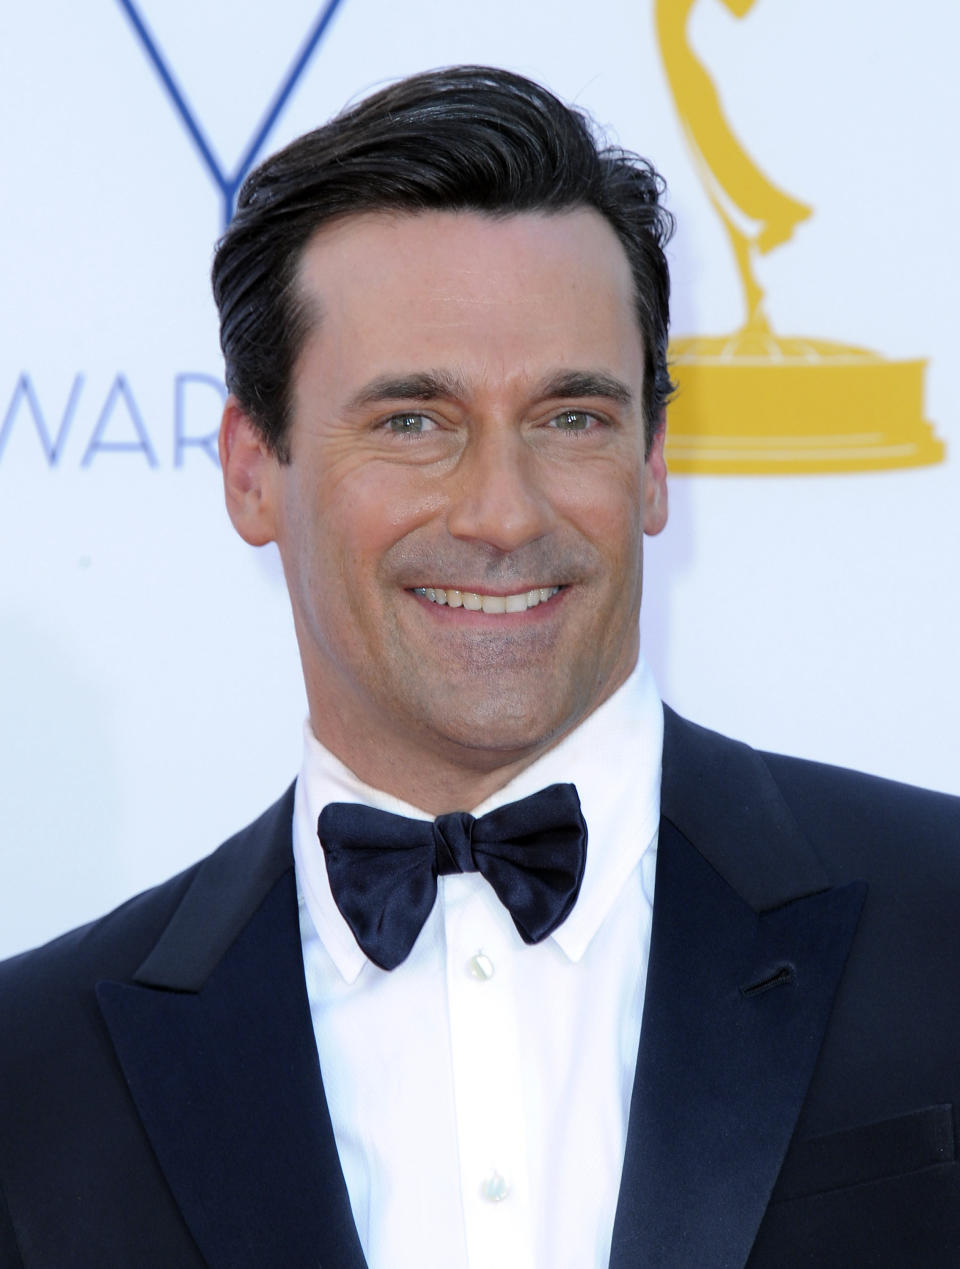 The Mad Man star is no stranger to smoking on screen -- but he quit smoking behind the scenes at the age of 24, <a href="http://www.people.com/people/jon_hamm/0,,,00.html">according to People.com.</a> "It's glamorous on film, but it's not glamorous waking up and smelling like an ashtray," he told the publication.  So how does he handle playing his chain-smoking character, Don Draper? Herbal cigarettes. "They taste like a mixture between pot and soap," <a href="http://www.vulture.com/2008/09/jon_hamm_on.html">he once complained to New York magazine's Vulture.com</a>.  "But we’re being realistic -- people did smoke back then. My father smoked everywhere, even in the car, in the summertime, with the windows up -- it was part of life," <a href="http://blog.chron.com/celebritybuzz/2012/03/jon-hamm-smoking-onscreen-is-debilitating/">he told the Houston Chronicle earlier this year</a>.